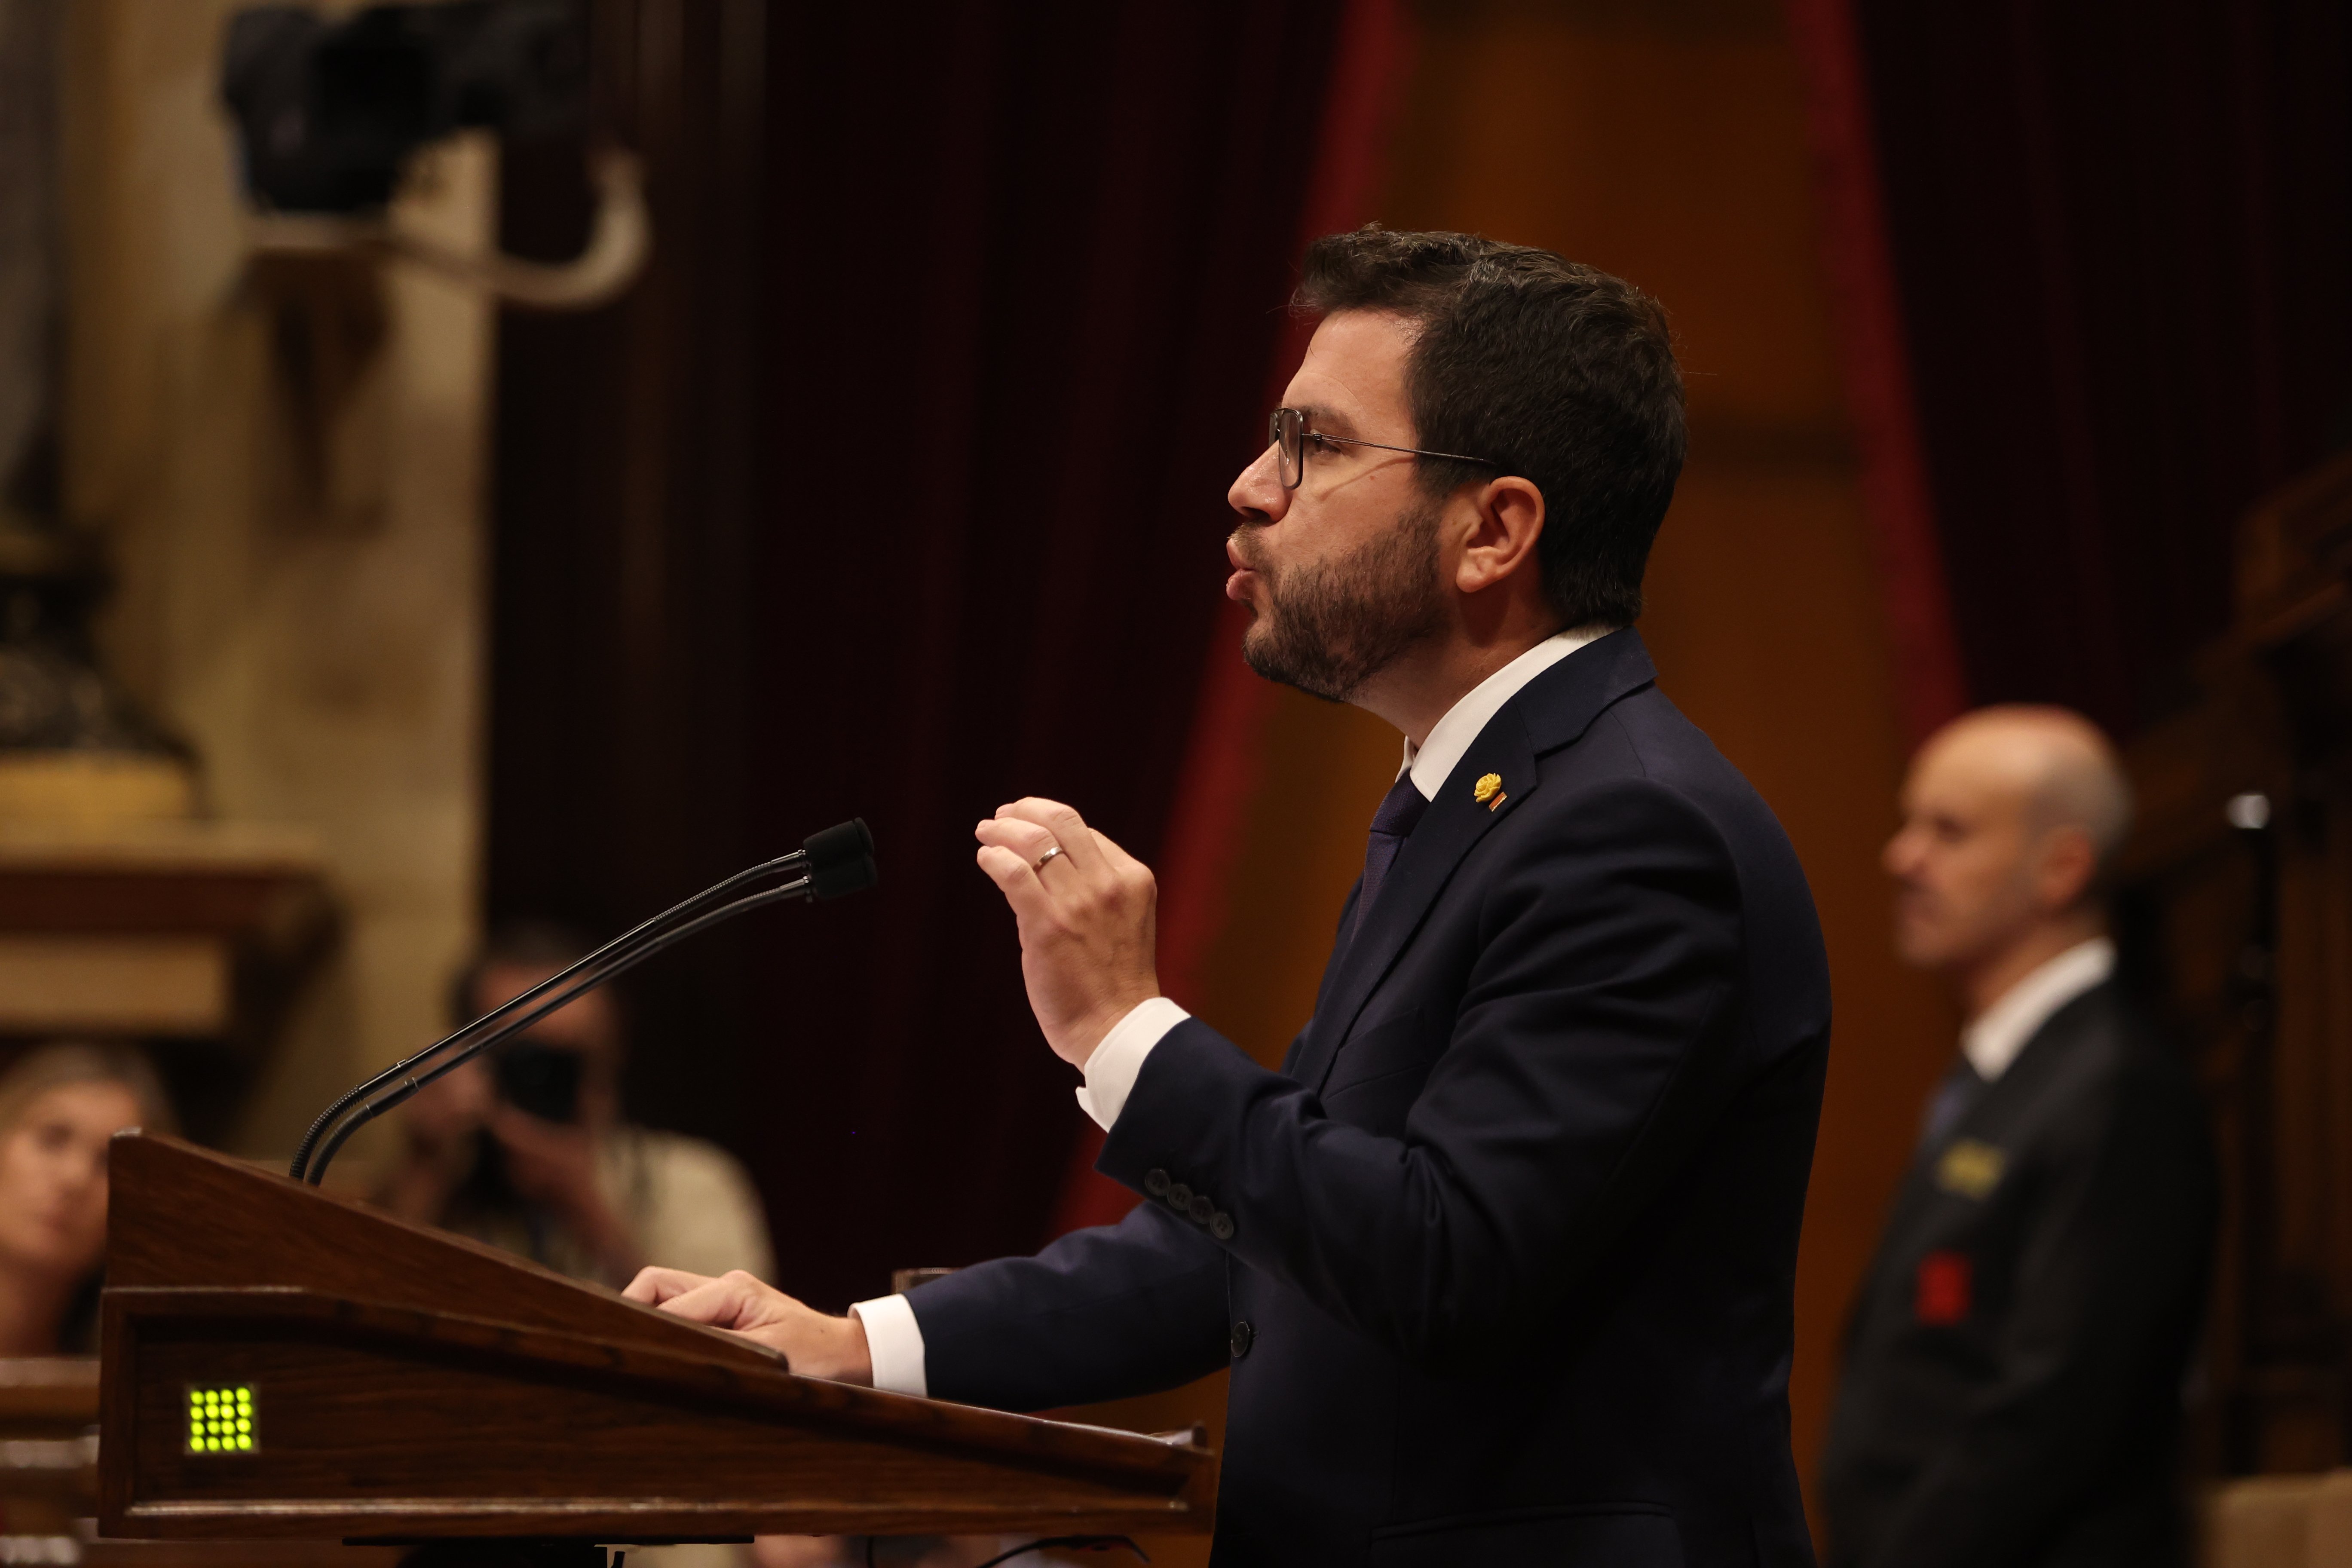 Aragonès proposes Clarity Agreement to guide a "definitive referendum" in Catalonia